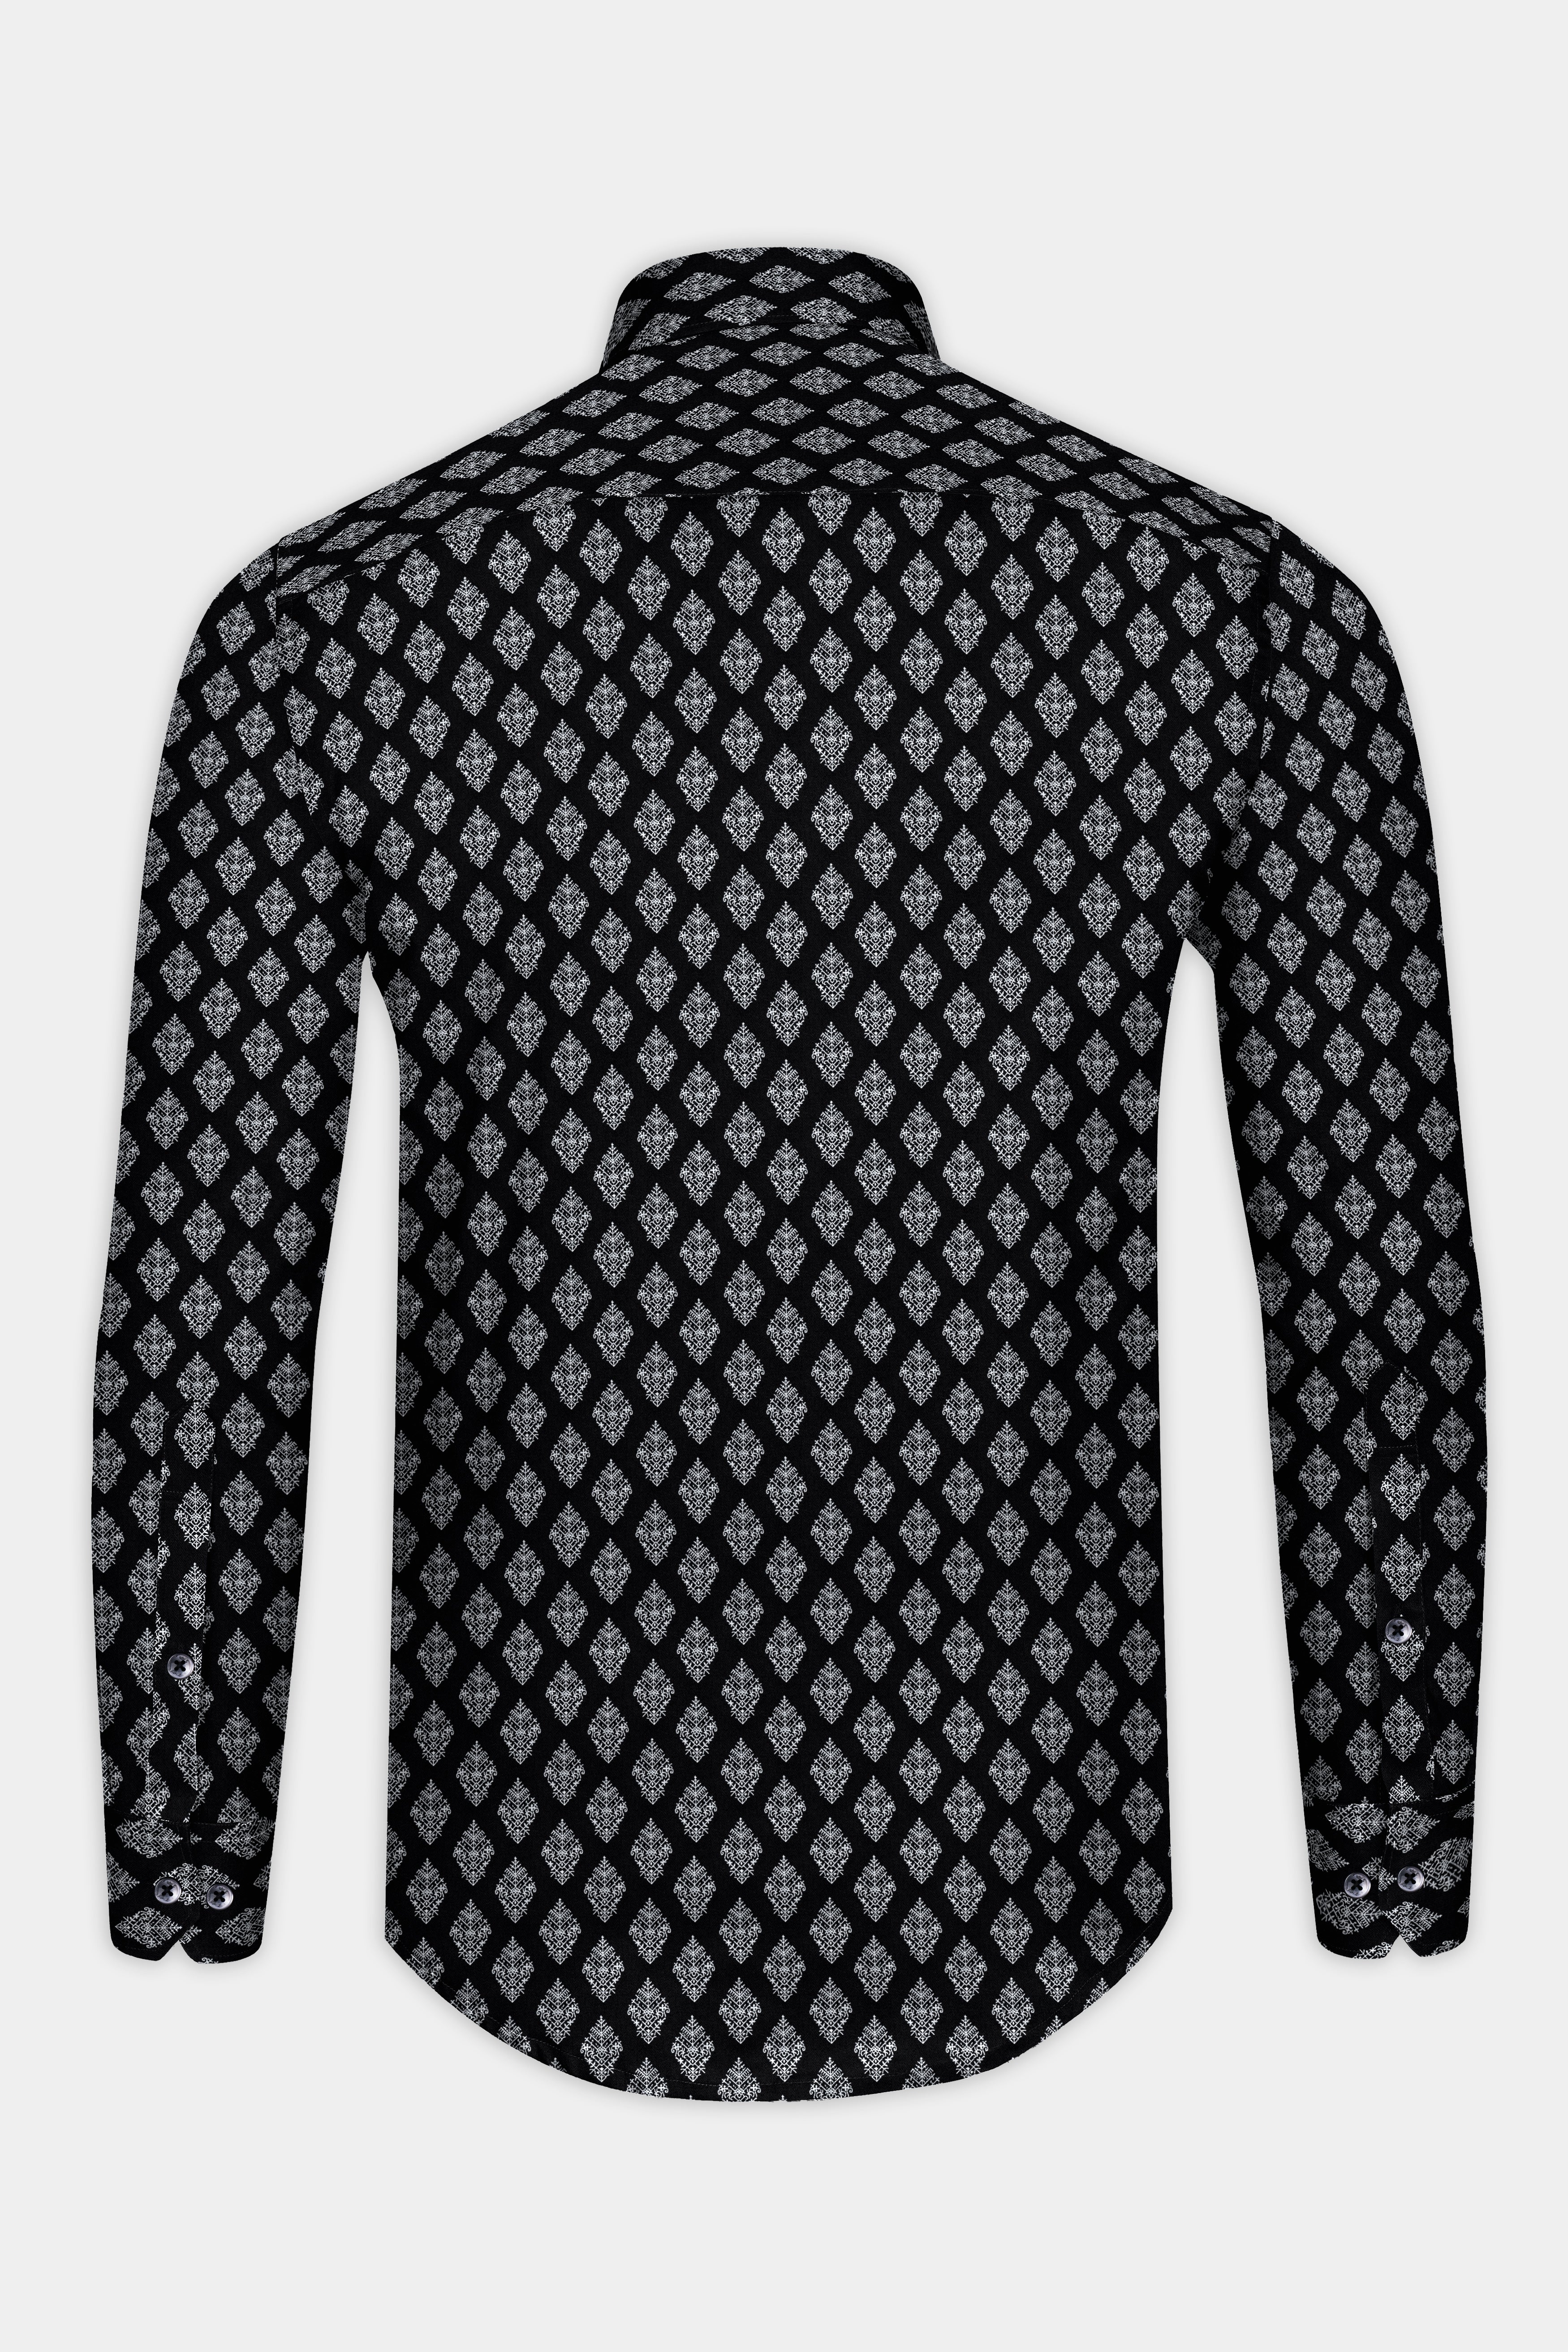 Jade Black with White Twill Printed Cotton Shirt